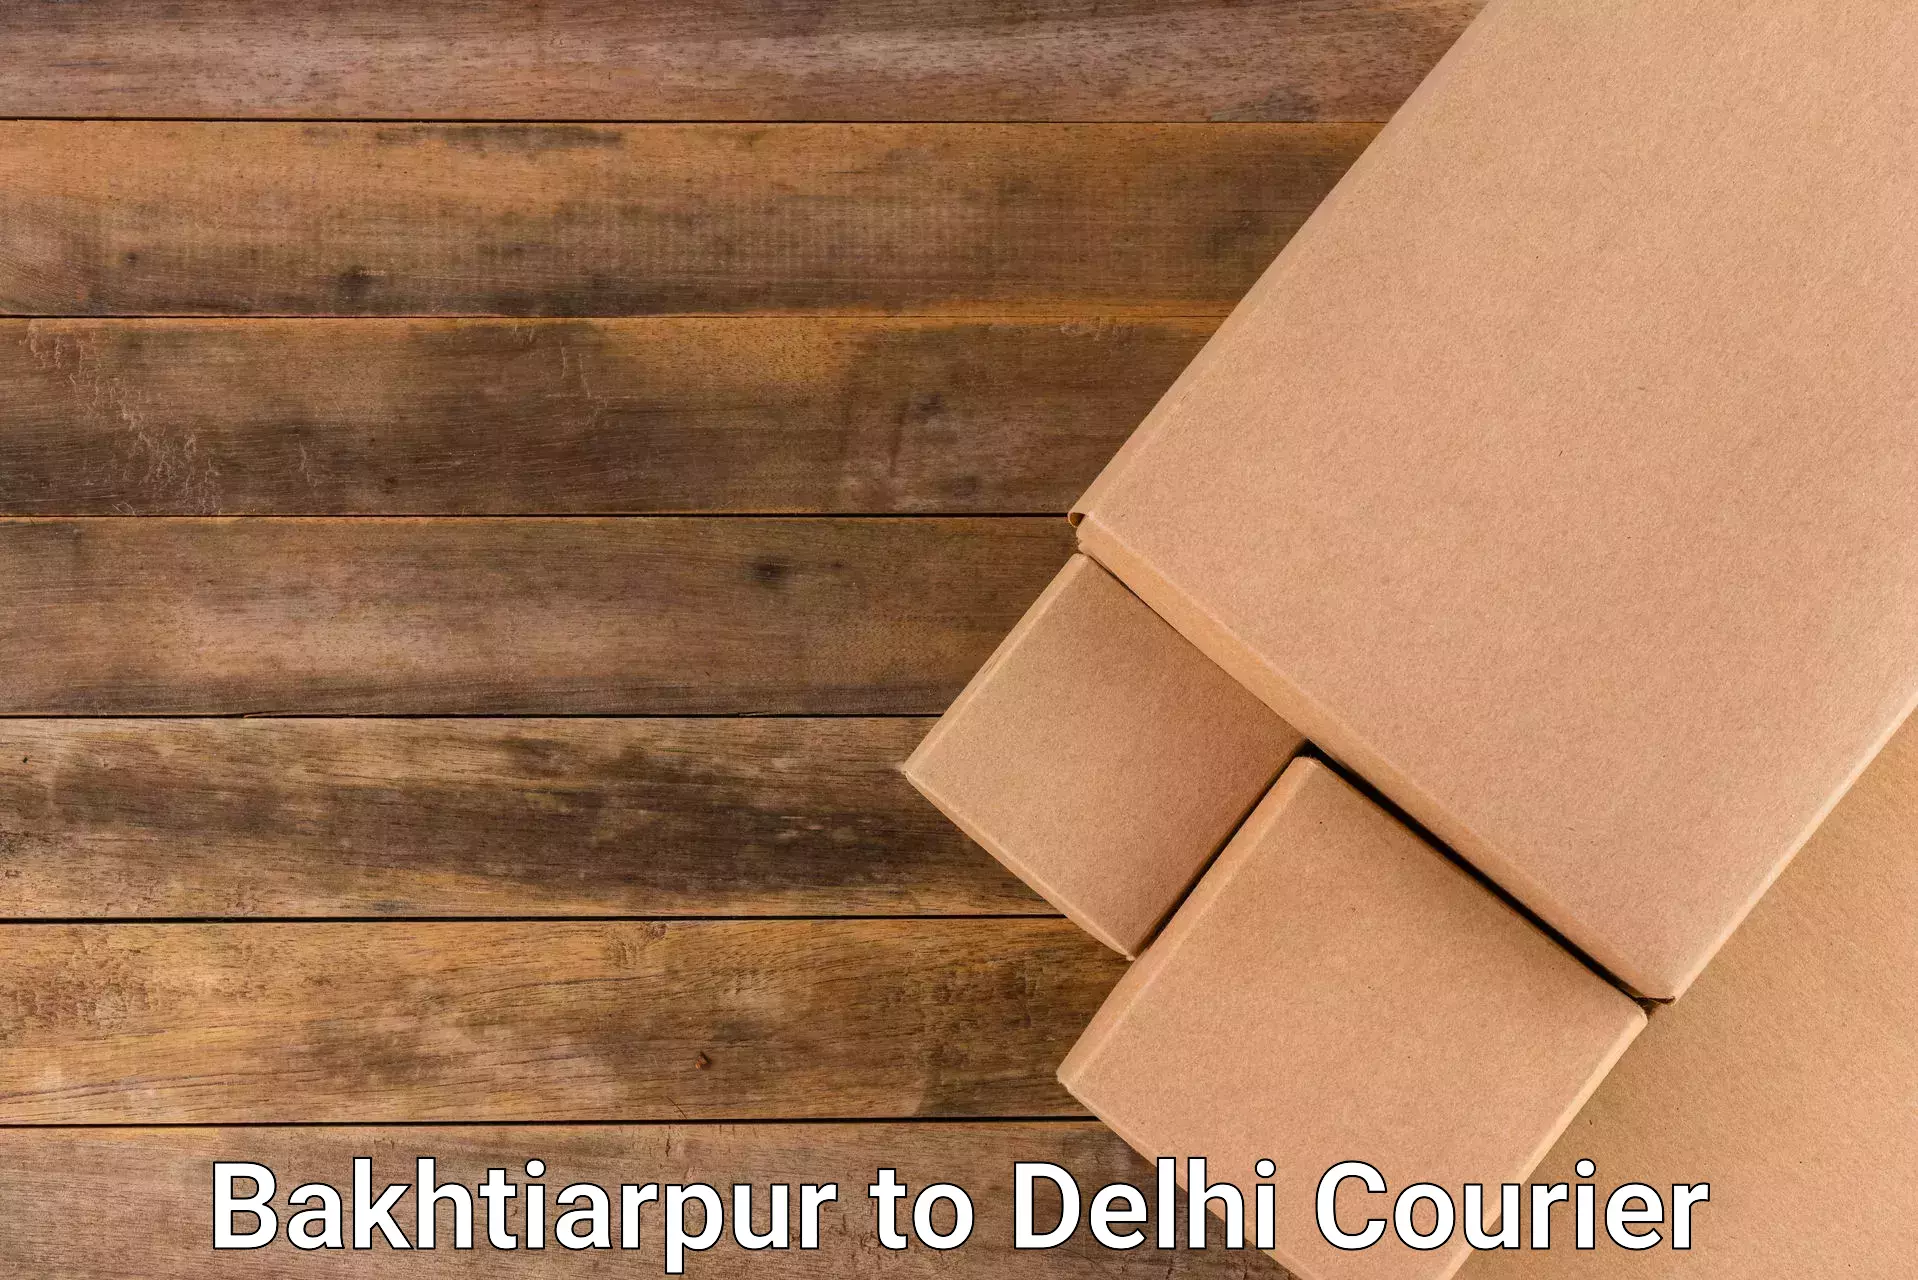 On-demand courier Bakhtiarpur to NCR